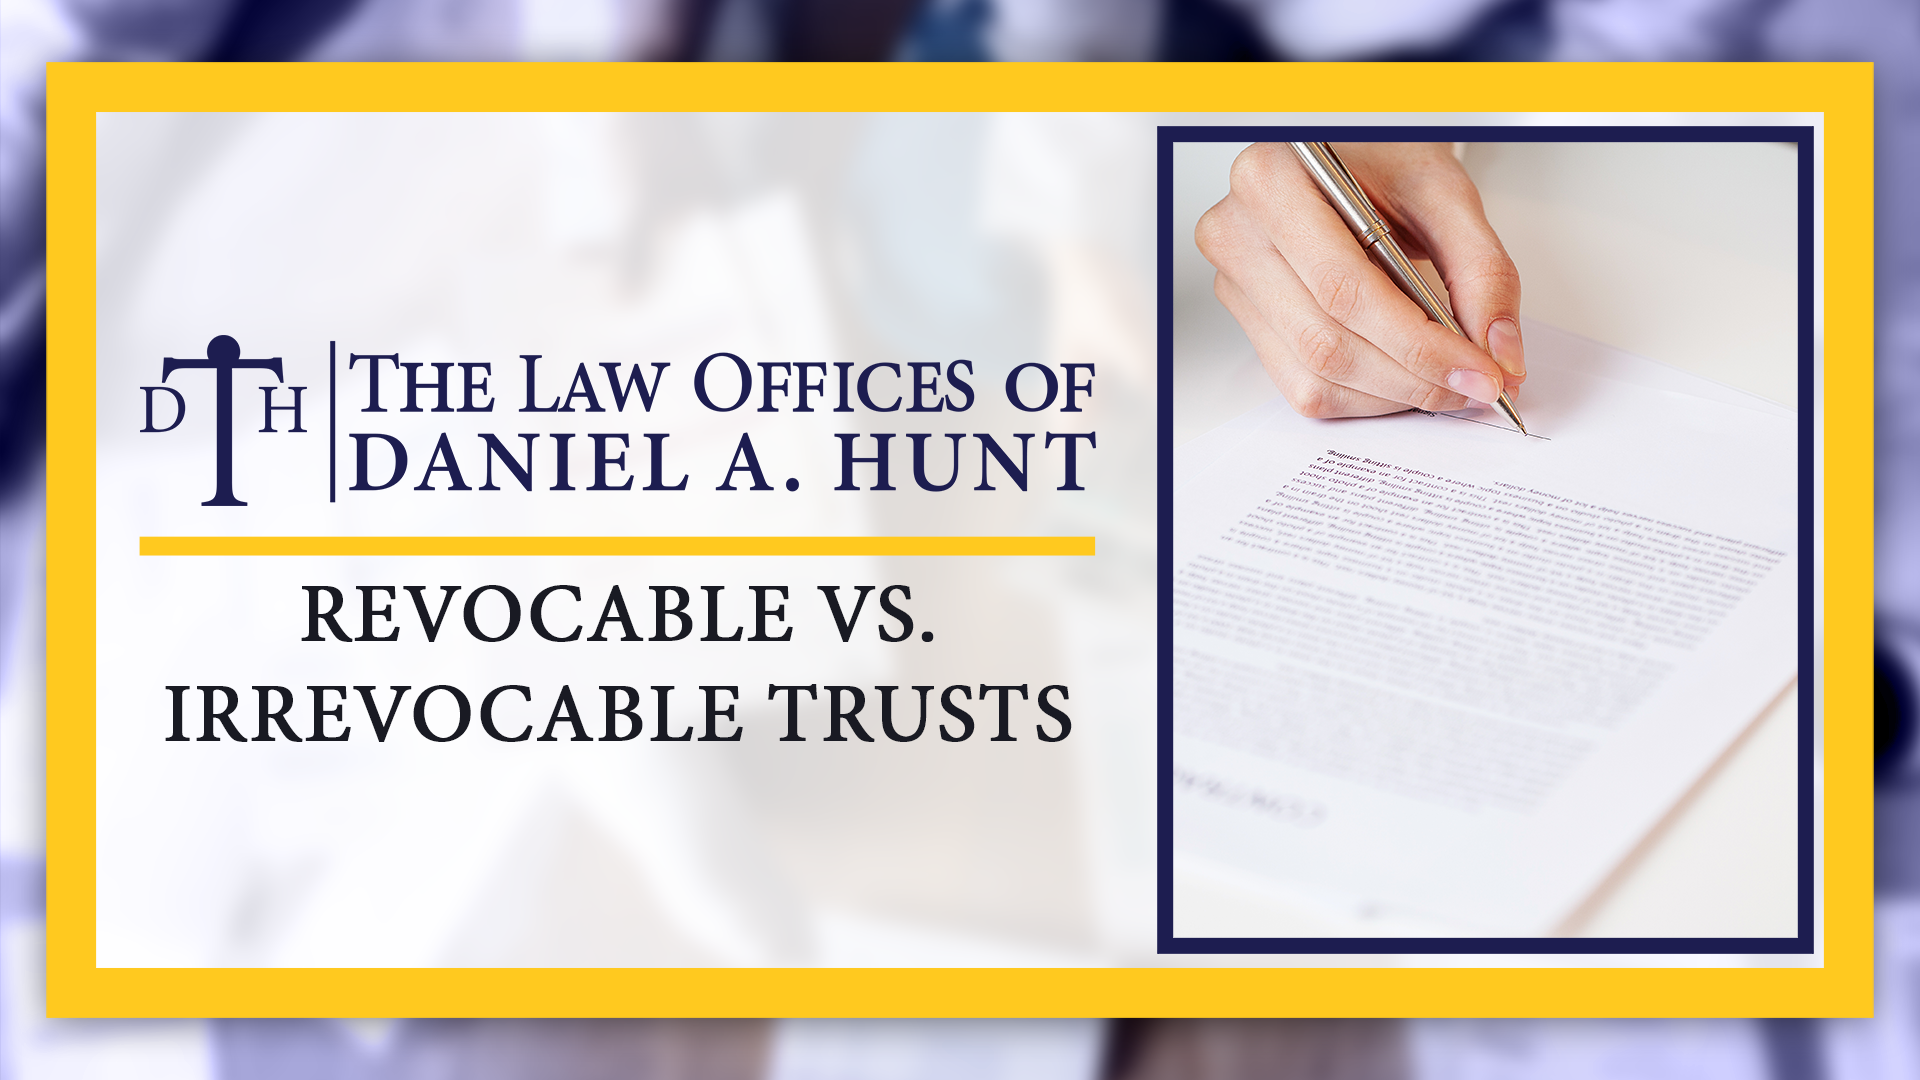 Revocable vs Irrevocable Trusts